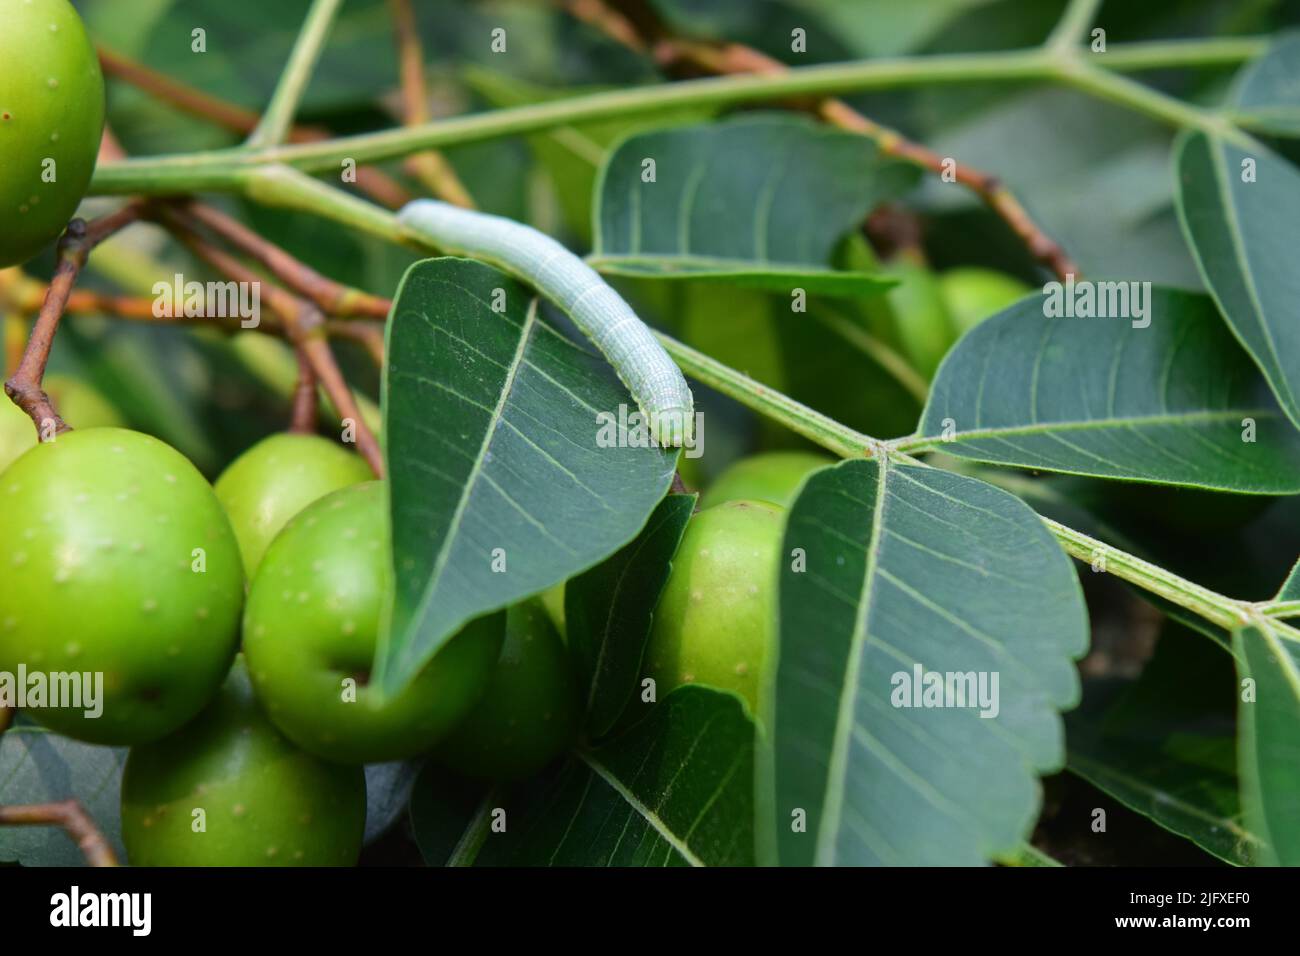 Insect on neem leaves. Neem leaf with fruits for ayurveda medicinal herbs. Wildlife with neem tree in nature Stock Photo